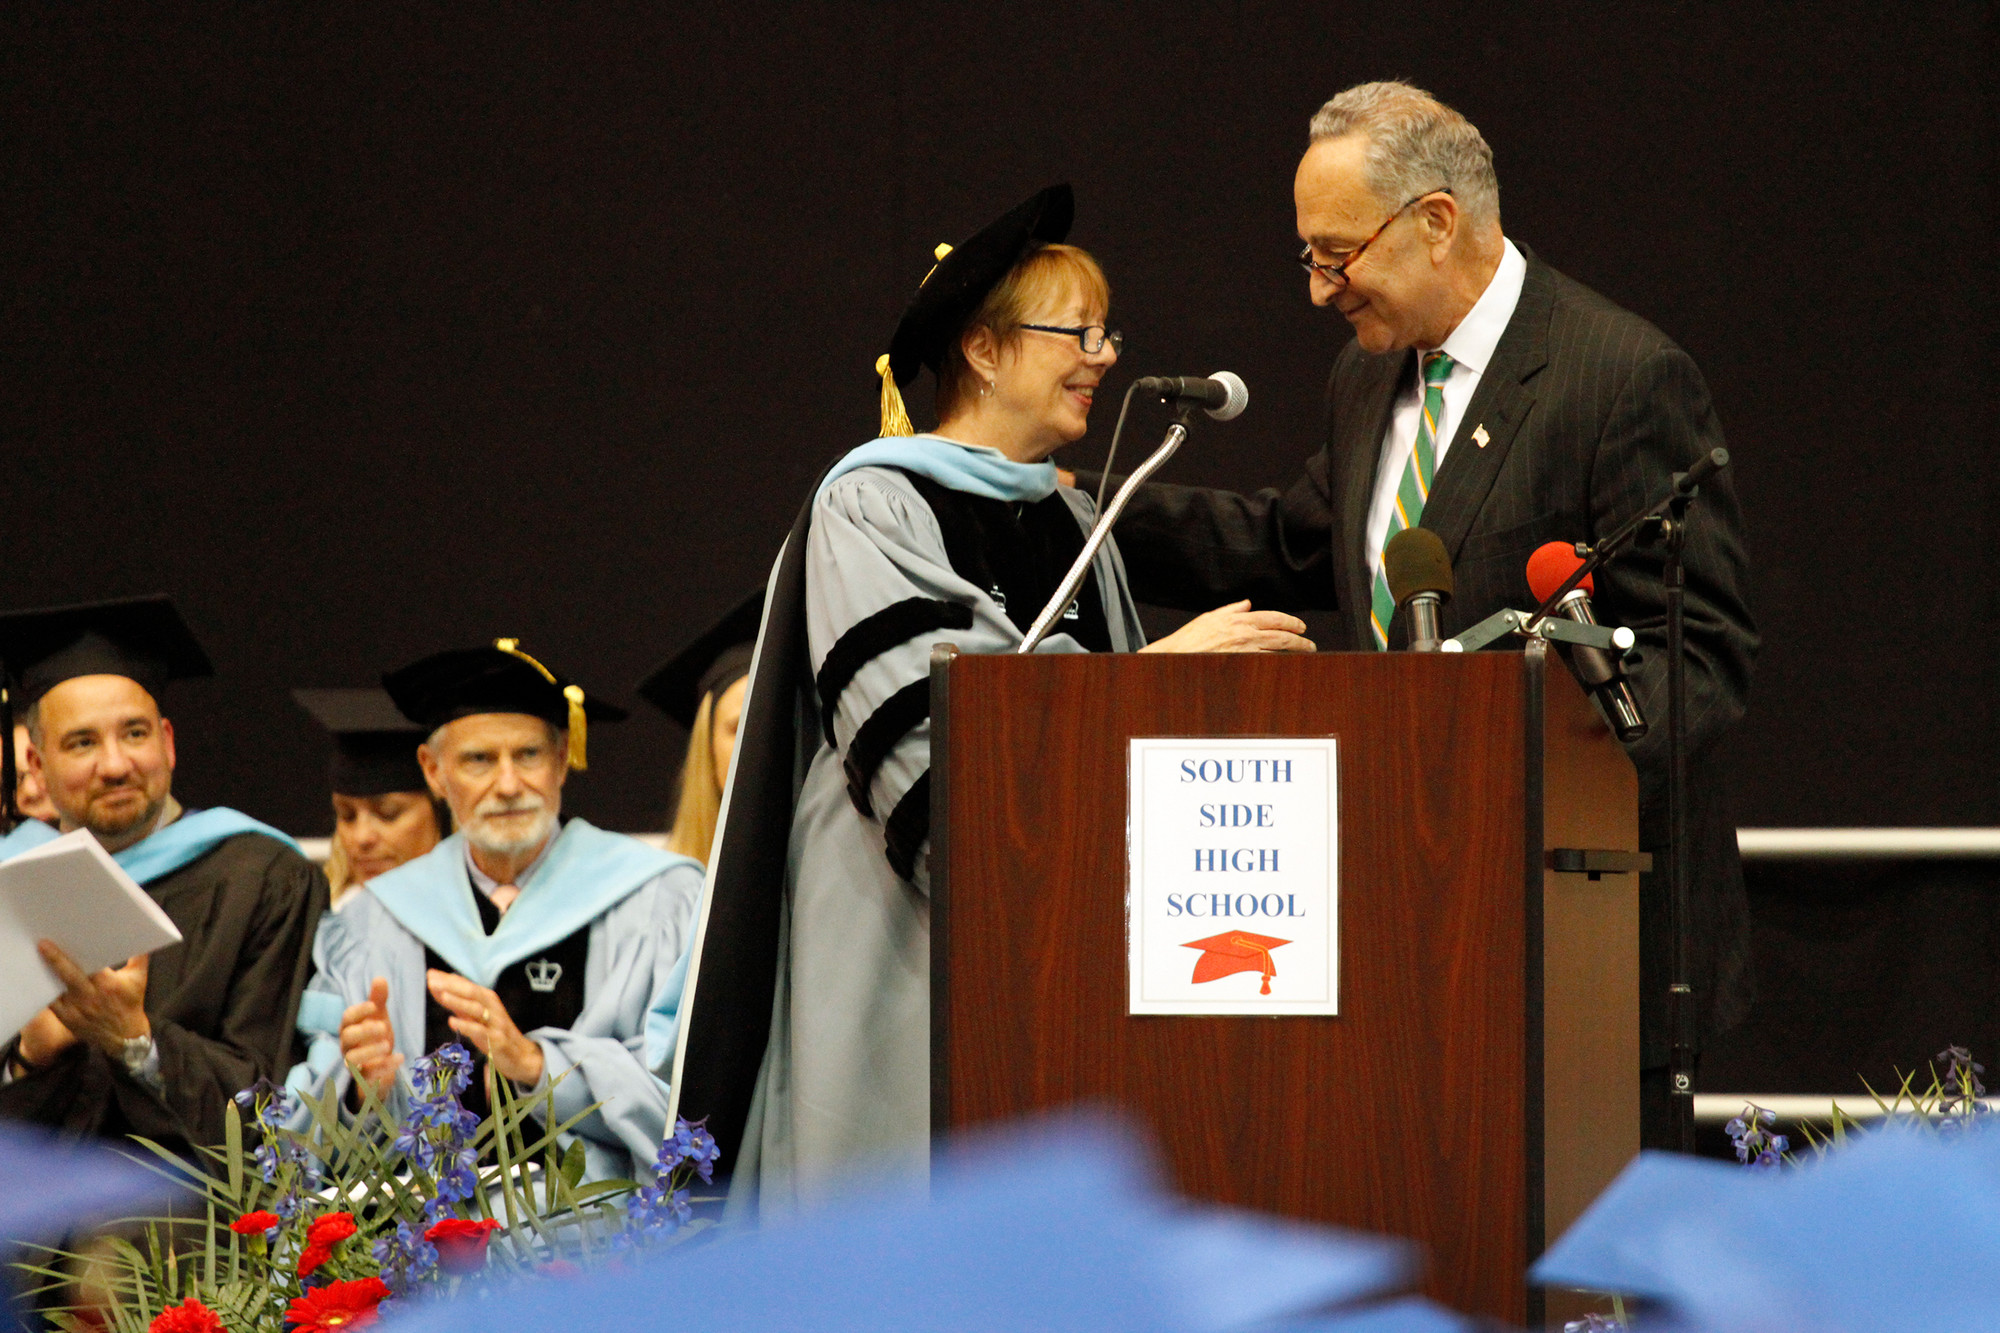 Dr. Carol Burris was thanked for her service at South Side High School by Sen. Charles Schumer at the school’s graduation ceremony last week.